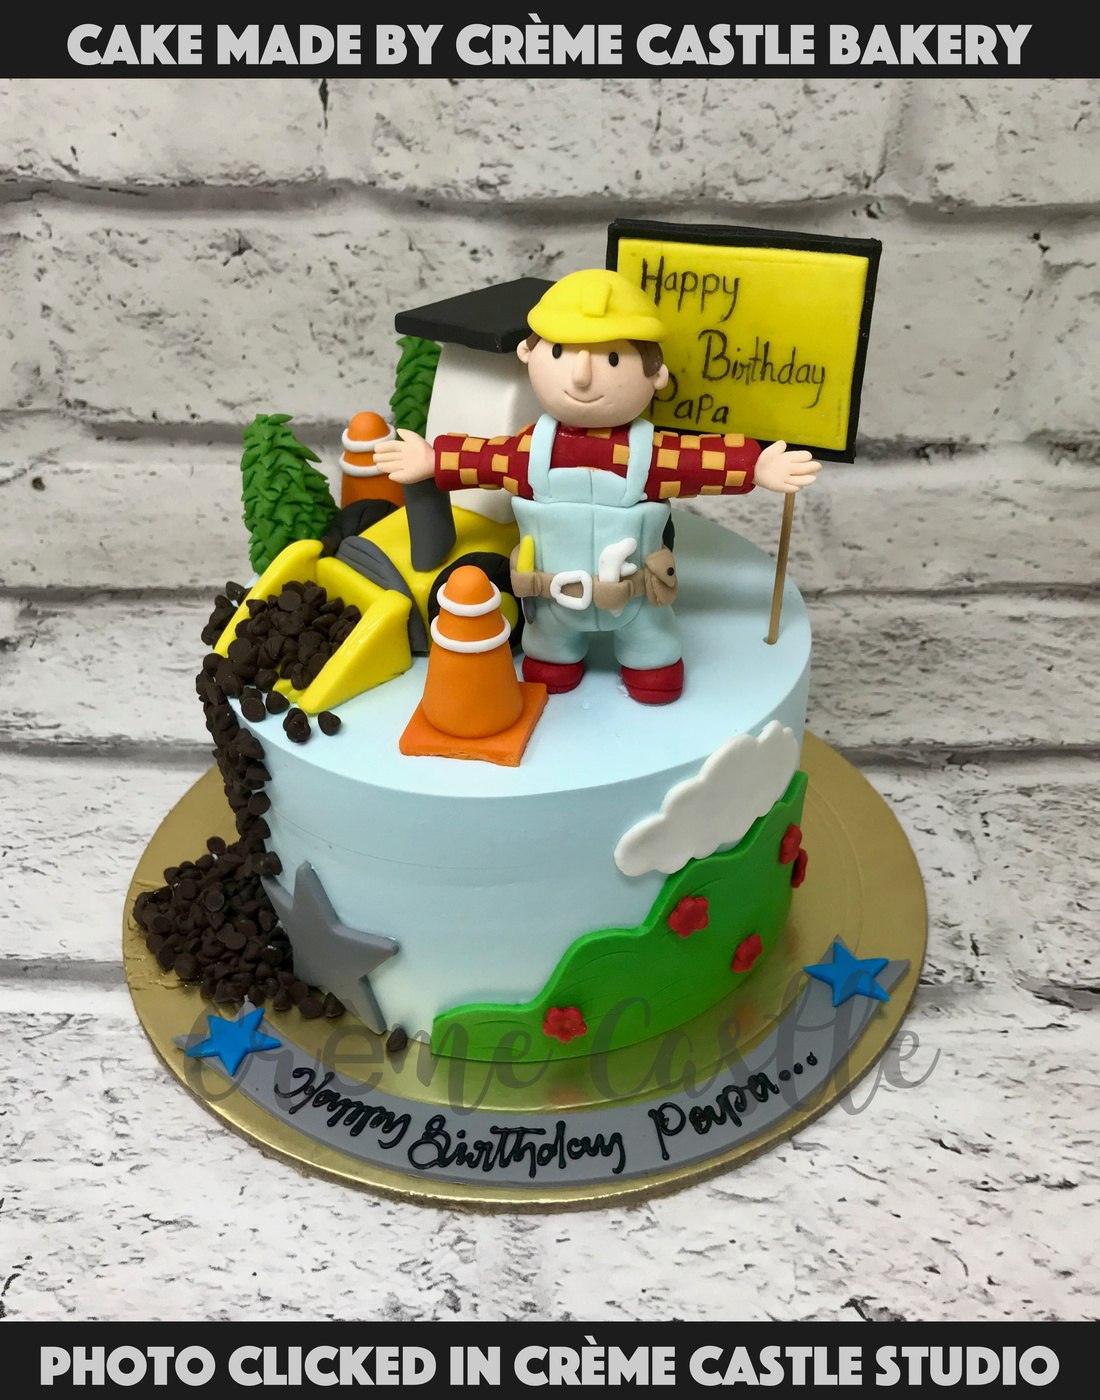 Construction theme cake with Crane by Creme Castle